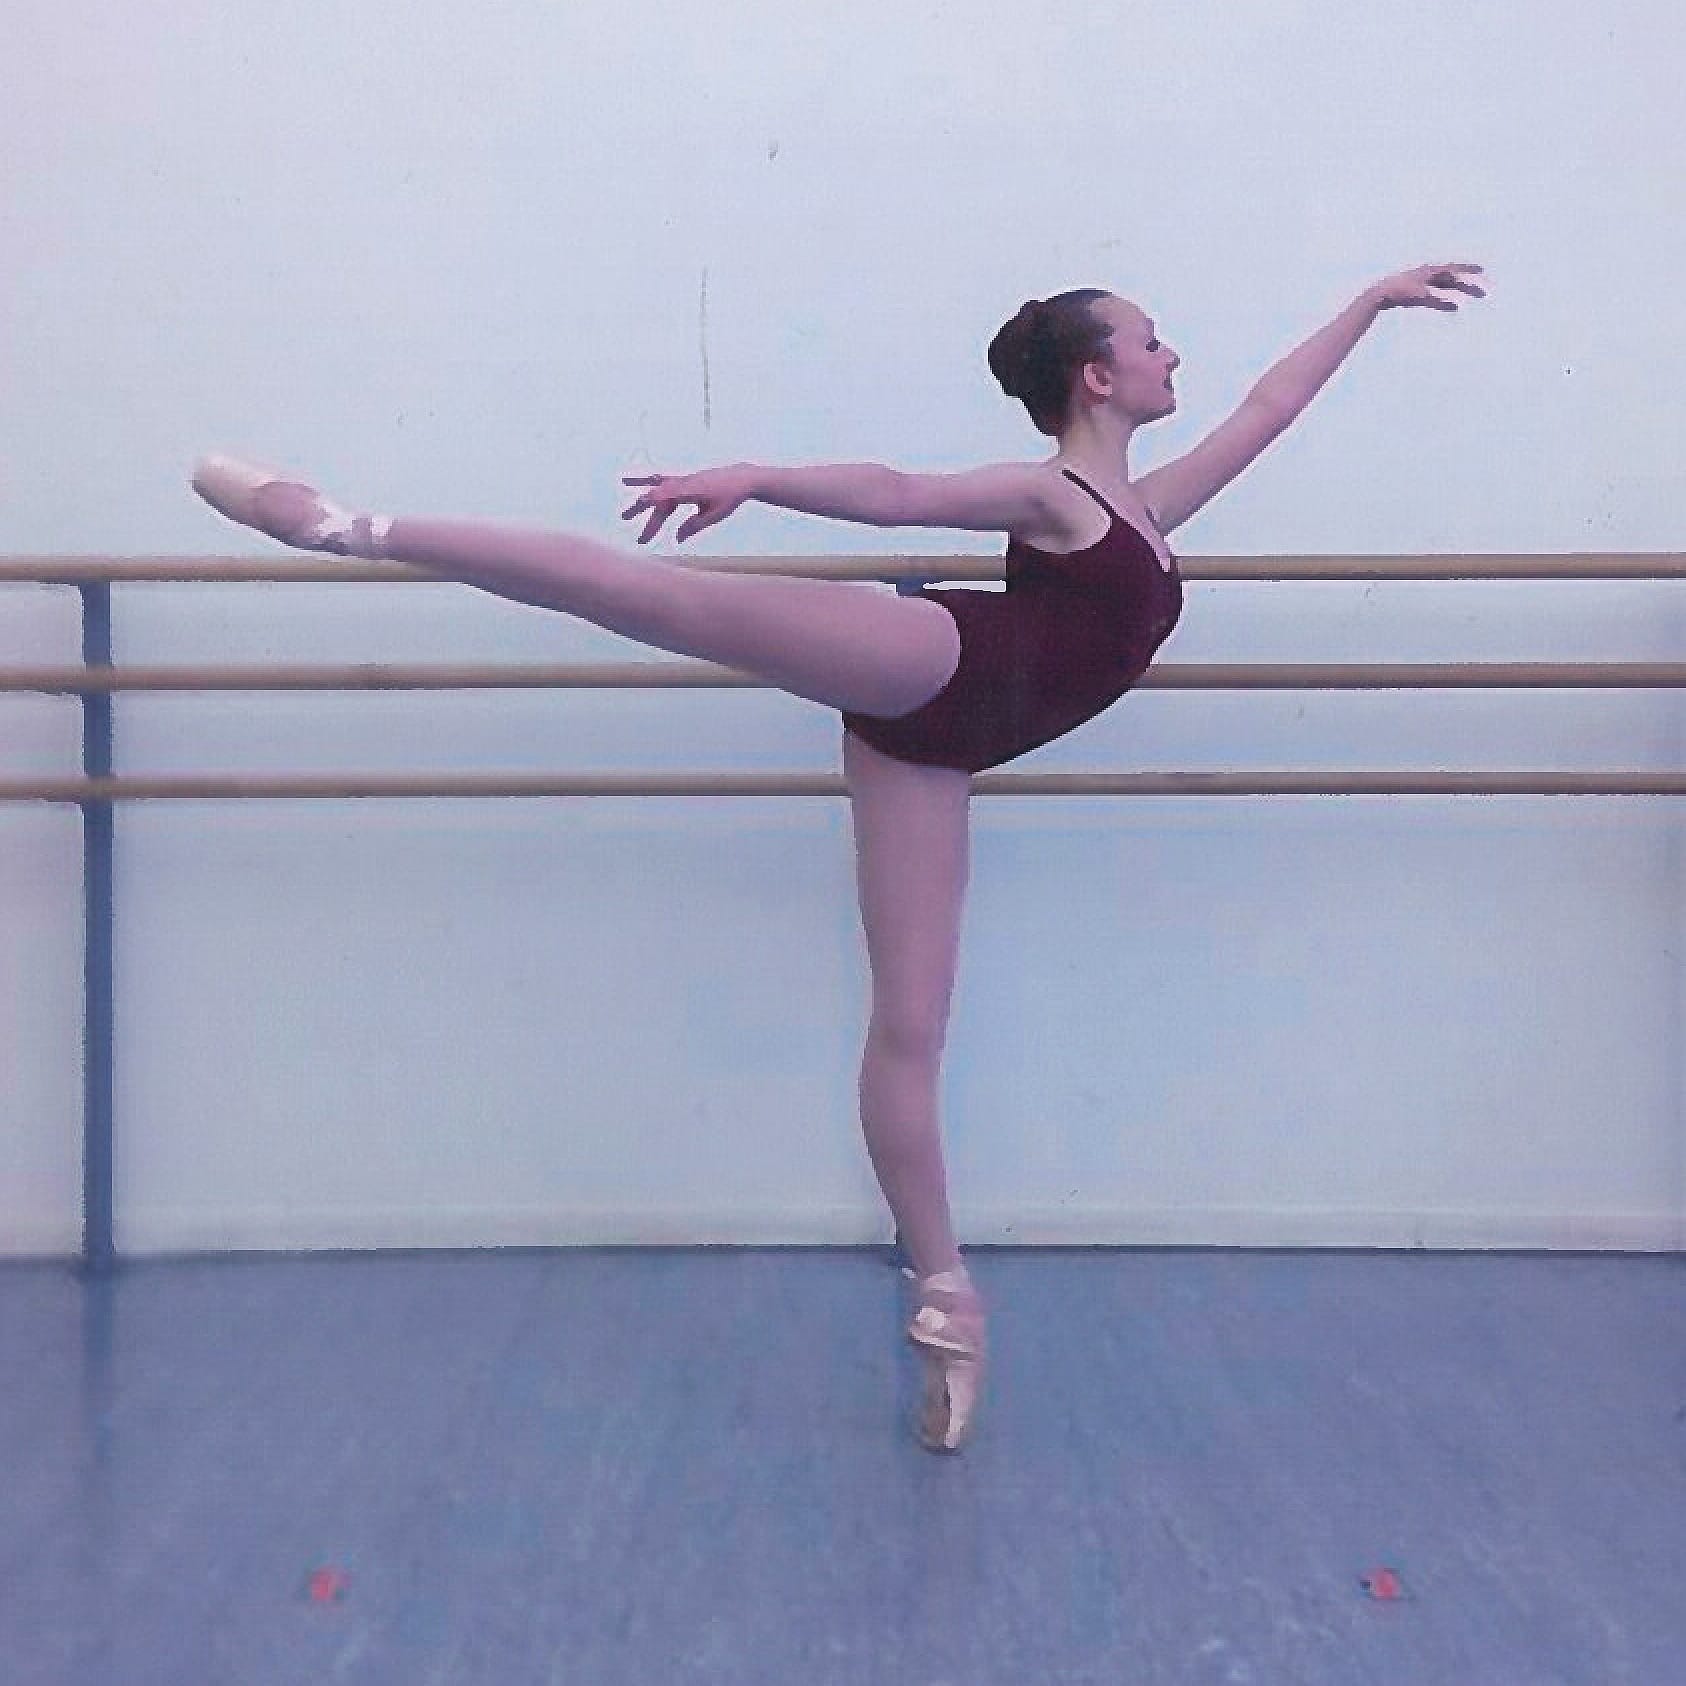 Camas resident Zuzu Metzler, 14, is one of 25 dancers selected from all over the country to study ballet under the tutelage of a legendary ballerina Suzanne Farrell in Washington D.C.